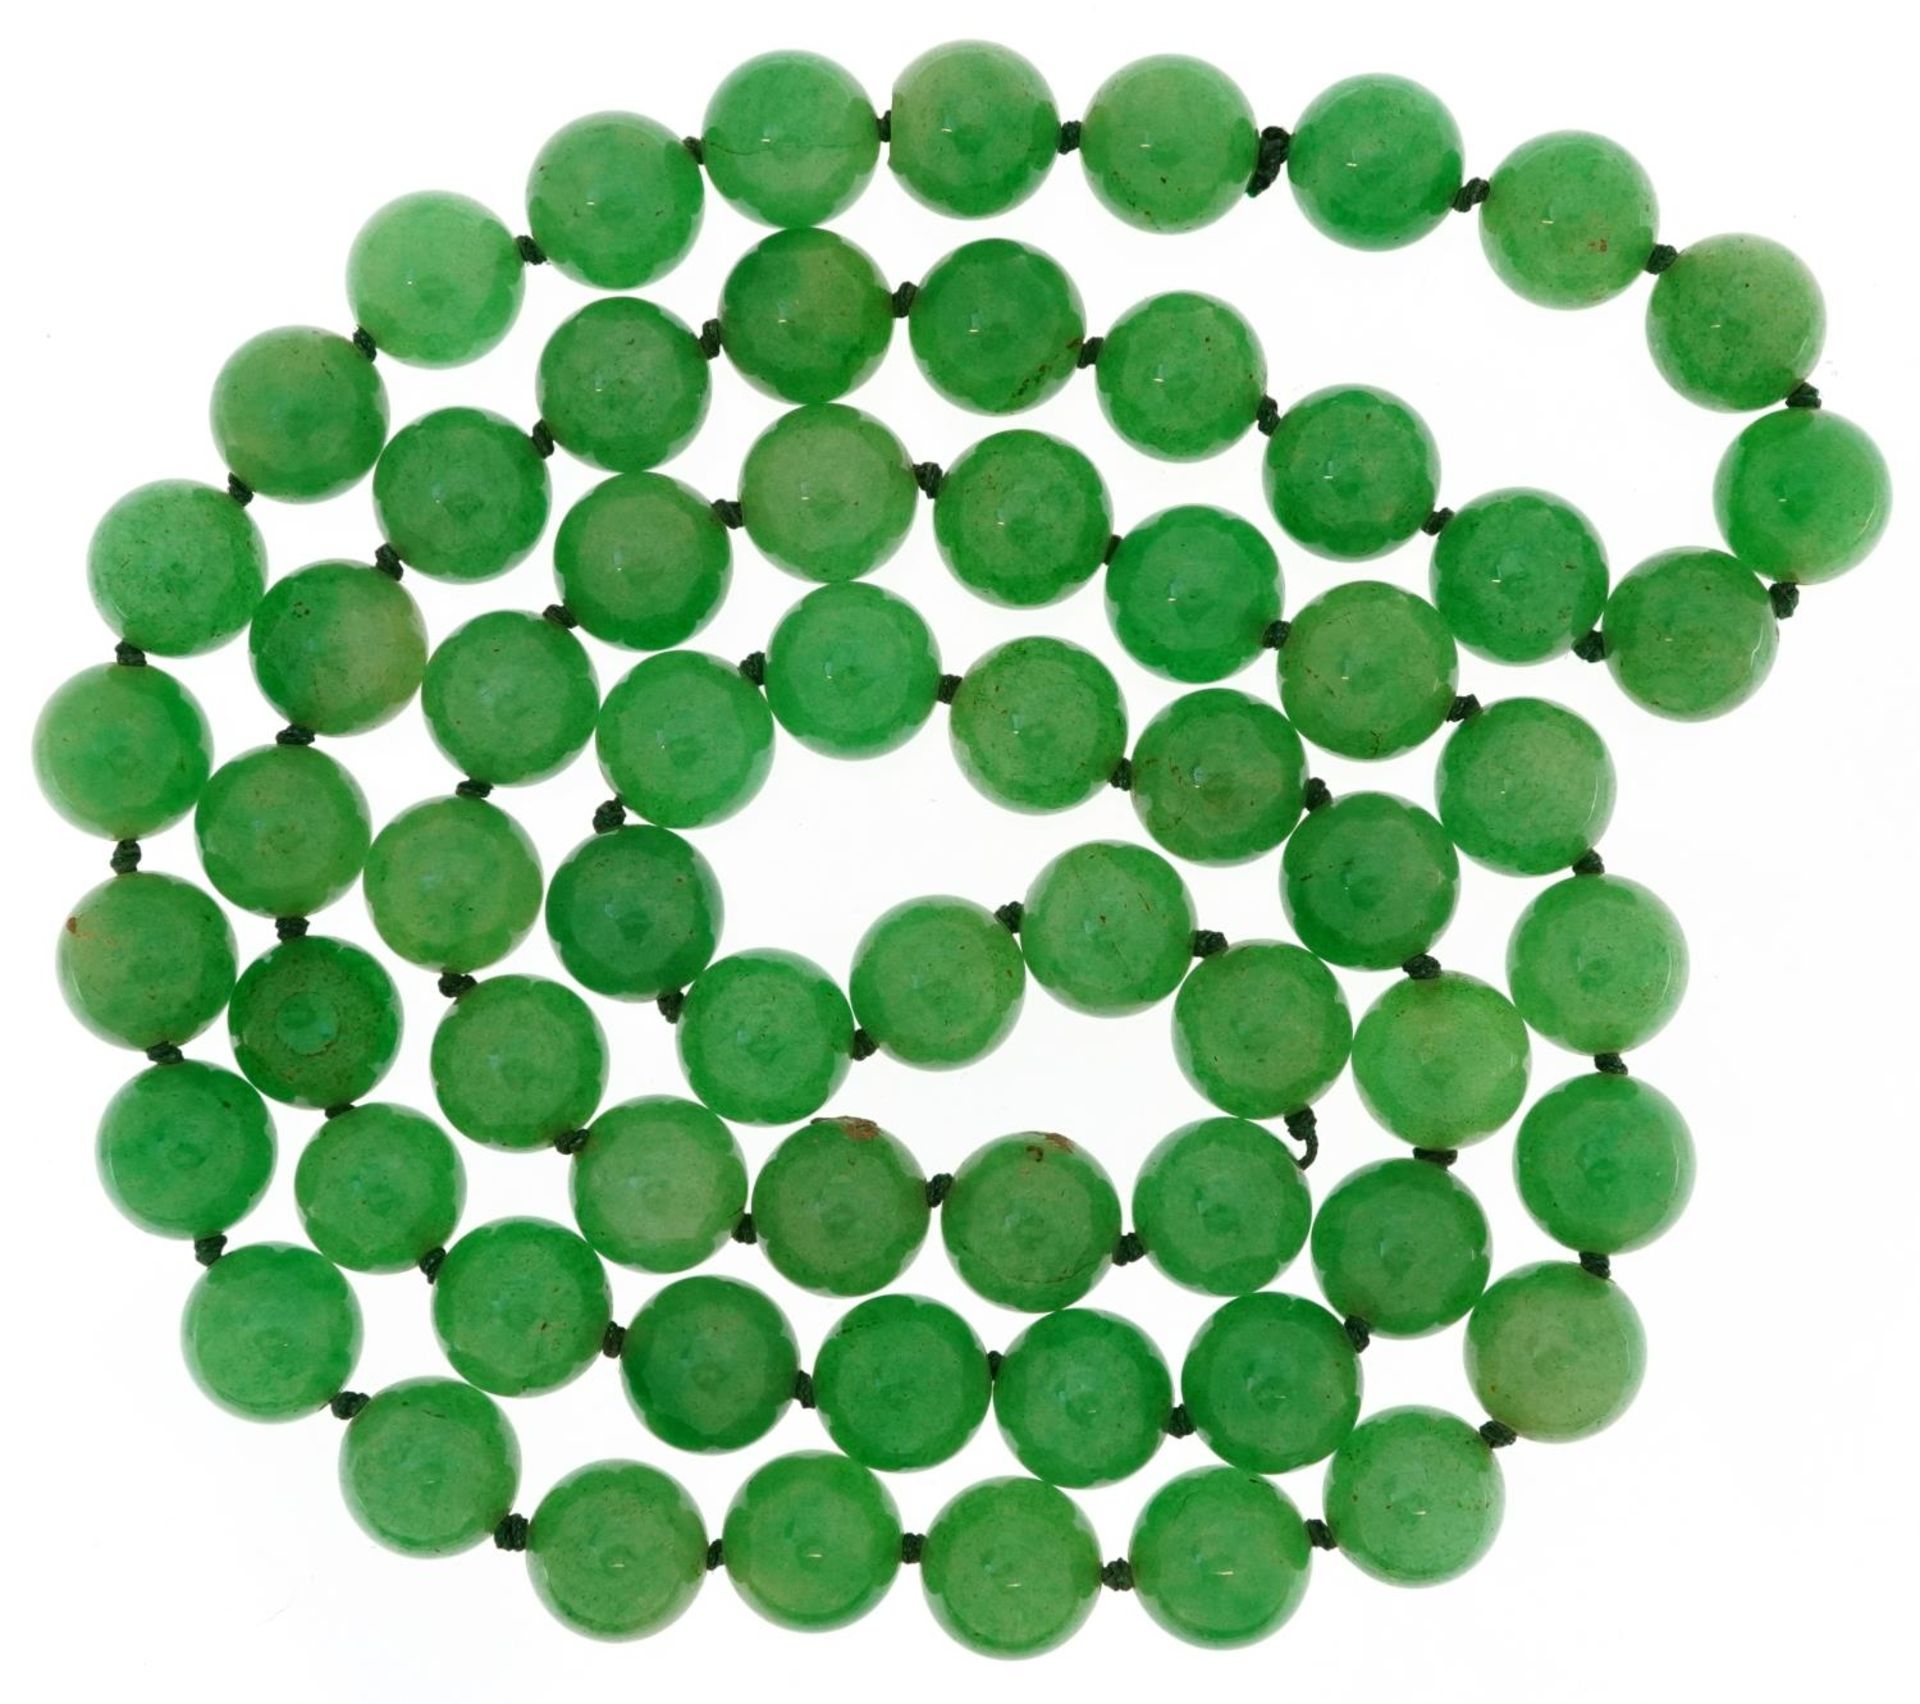 Chinese green jade bead necklace, each bead 12mm in diameter, overall 90cm in length, 159.2g - Bild 2 aus 2